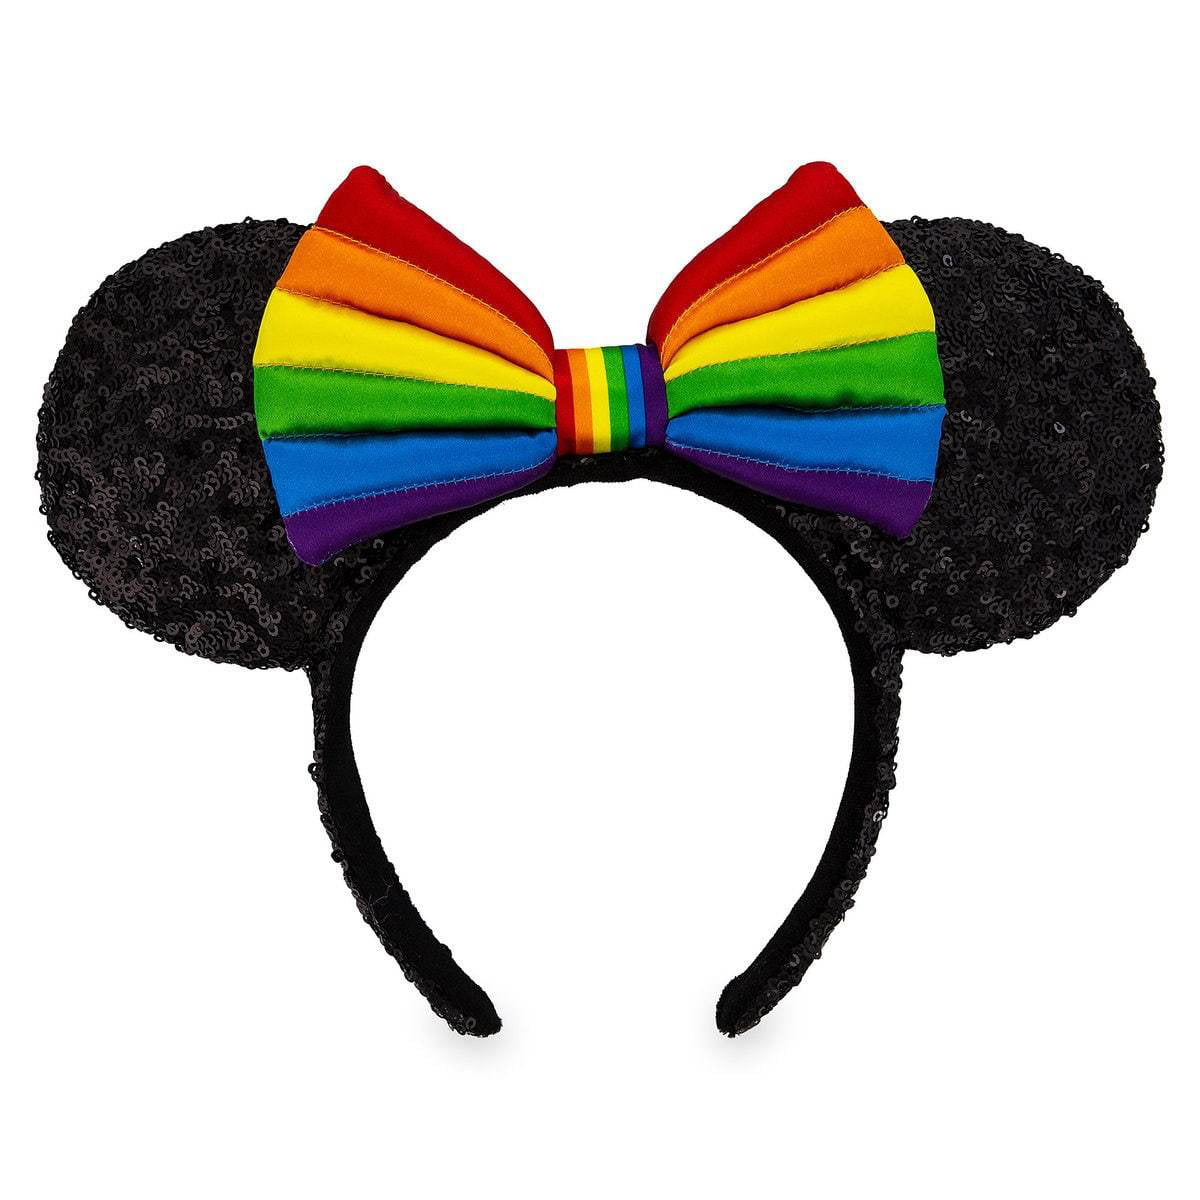 New Disney Parks Minnie Mouse Black Red Bow Sequins Ear Headband Costume Party 